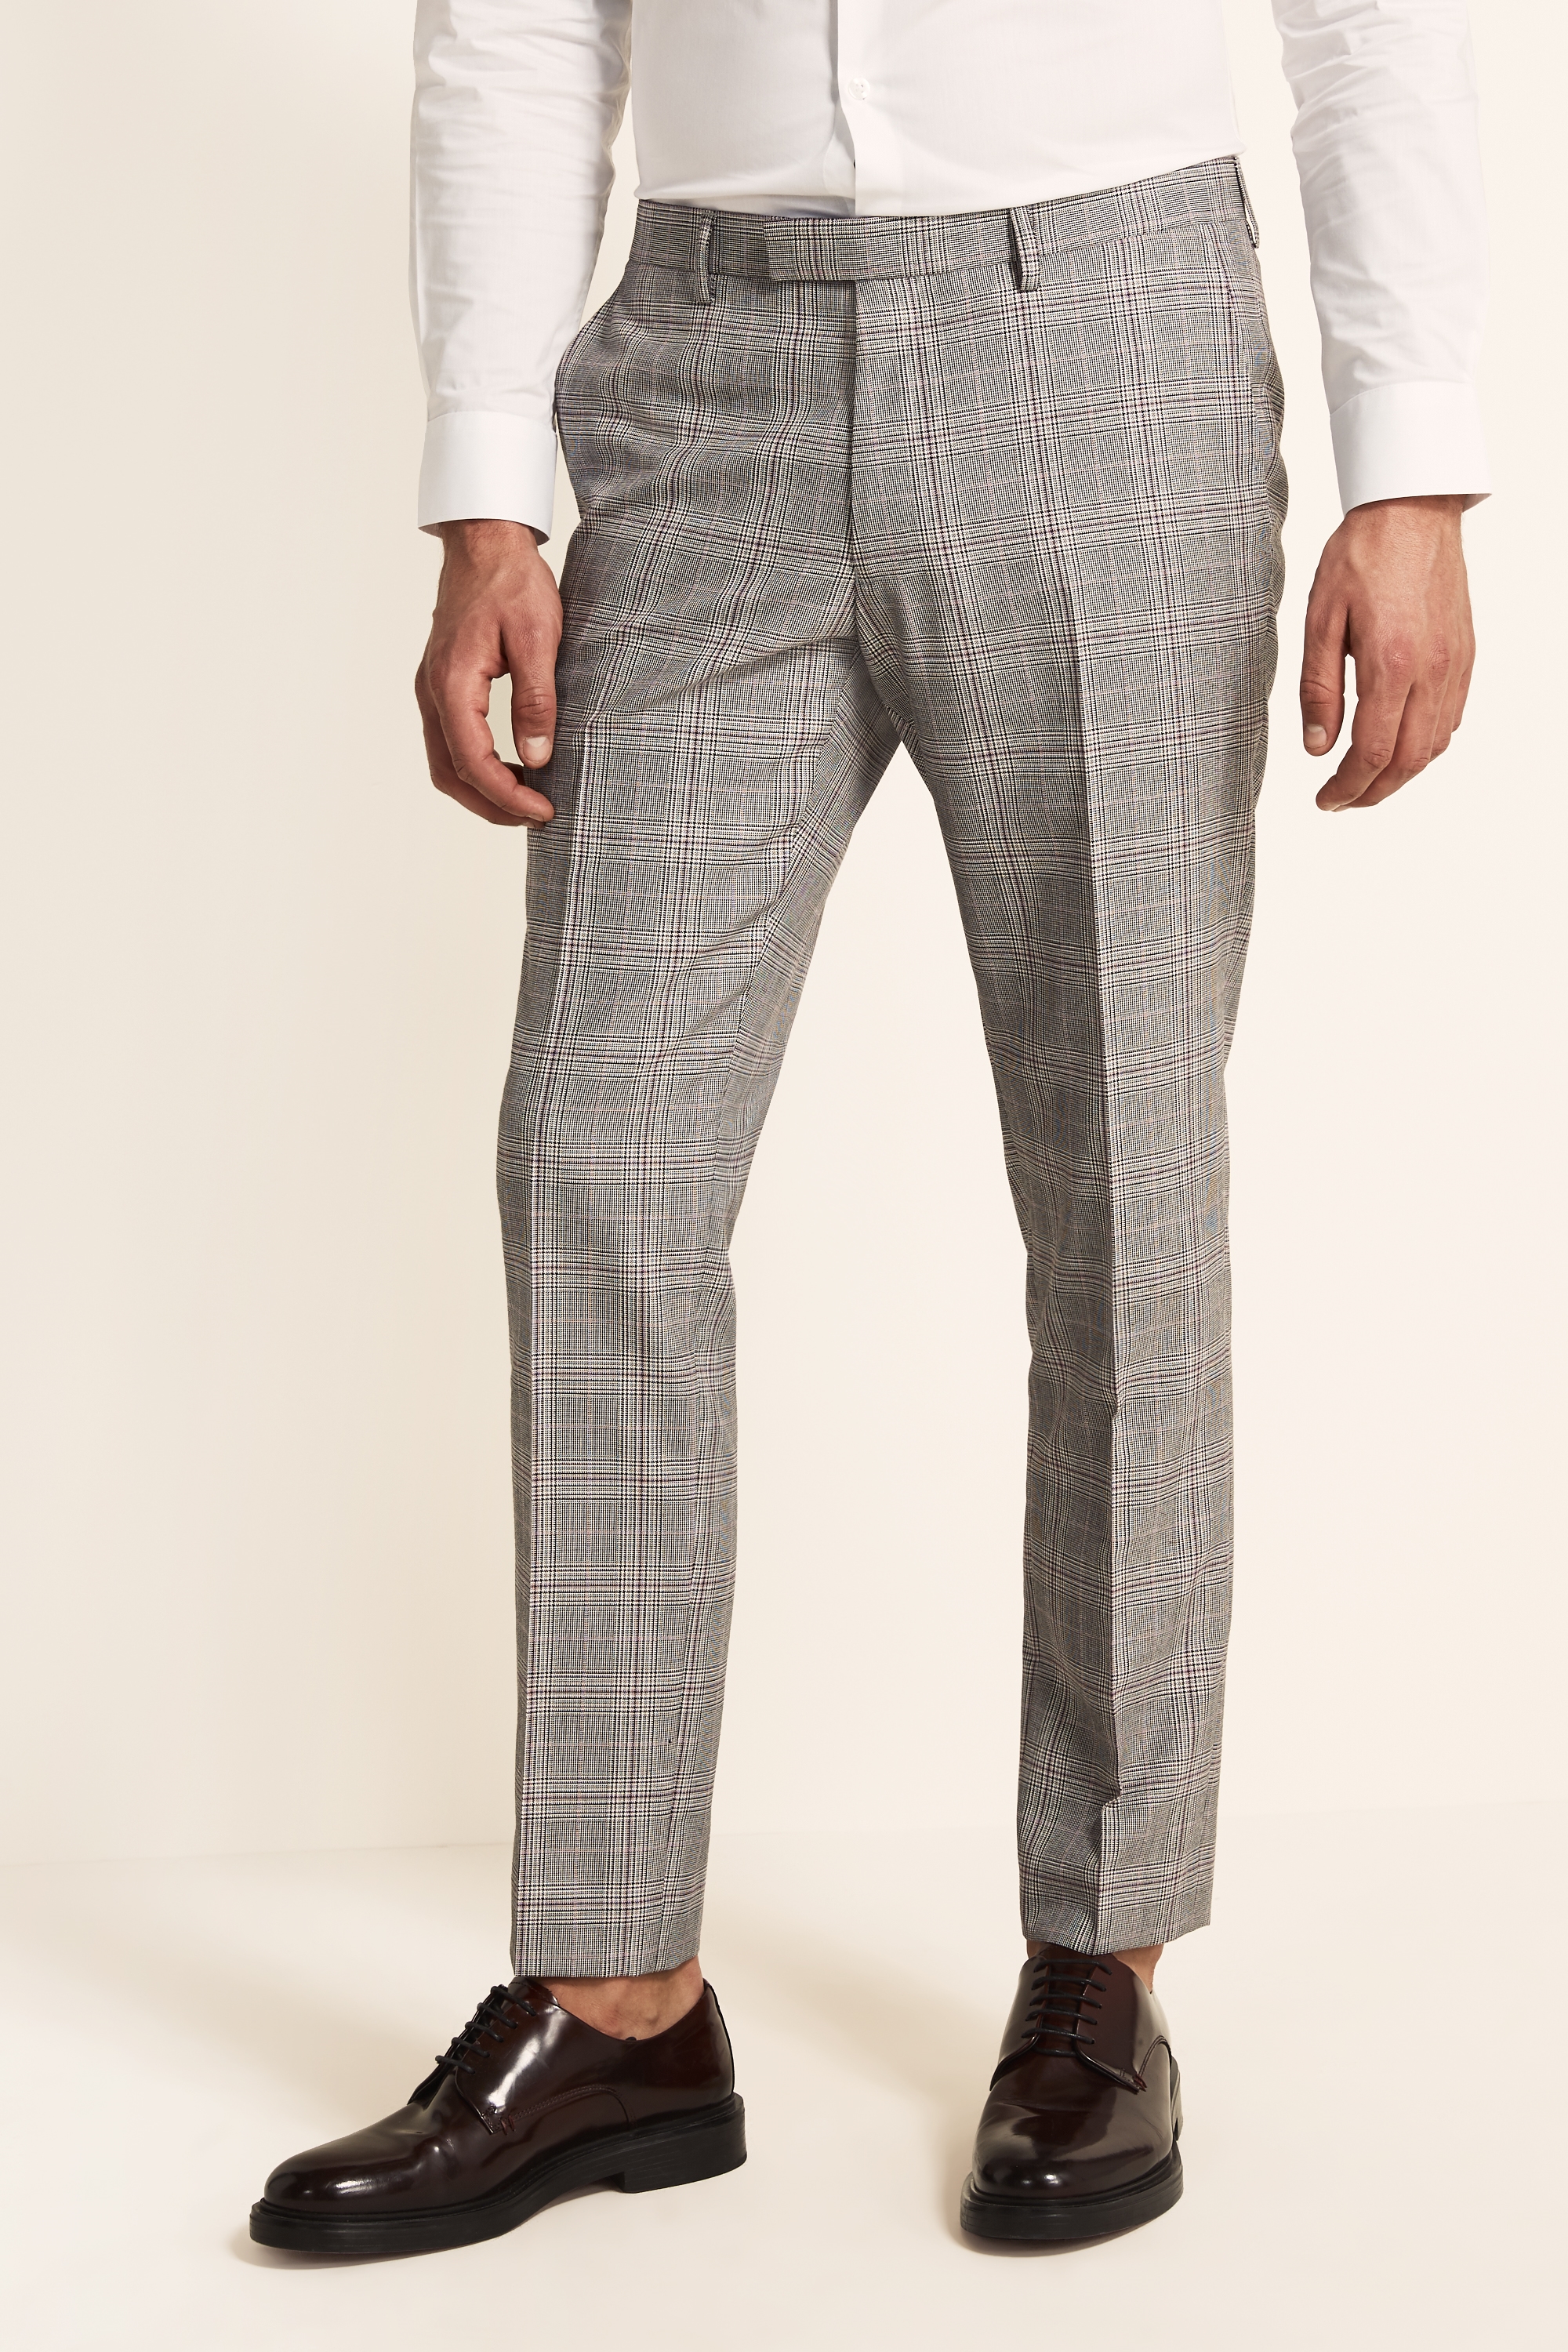 Slim Fit eco Black and White Raspberry Check Trousers